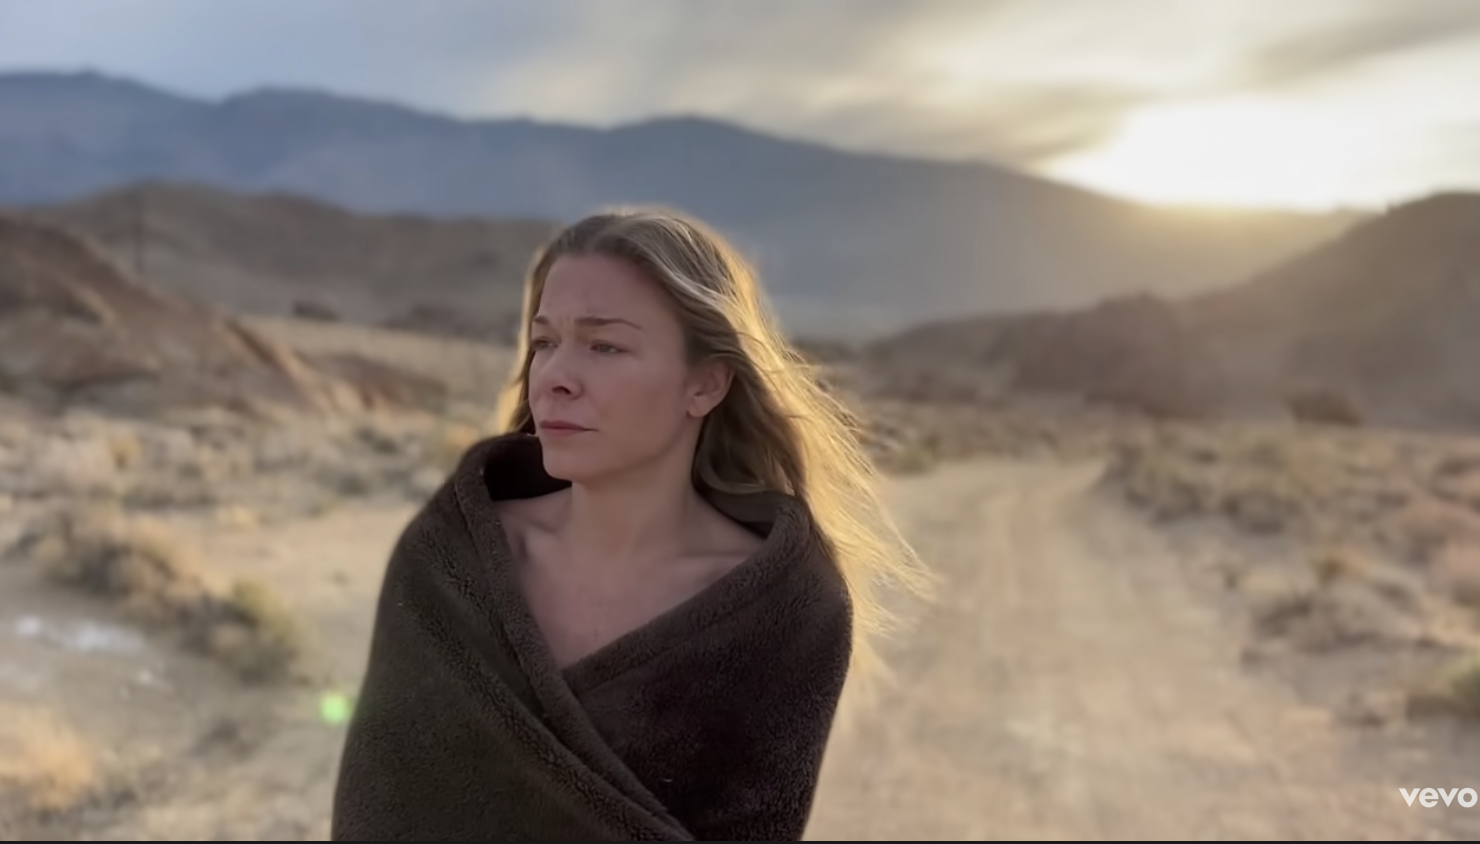 1480px x 844px - LeAnn Rimes Has A Toned Butt In Nude, Makeup-Free Music Video